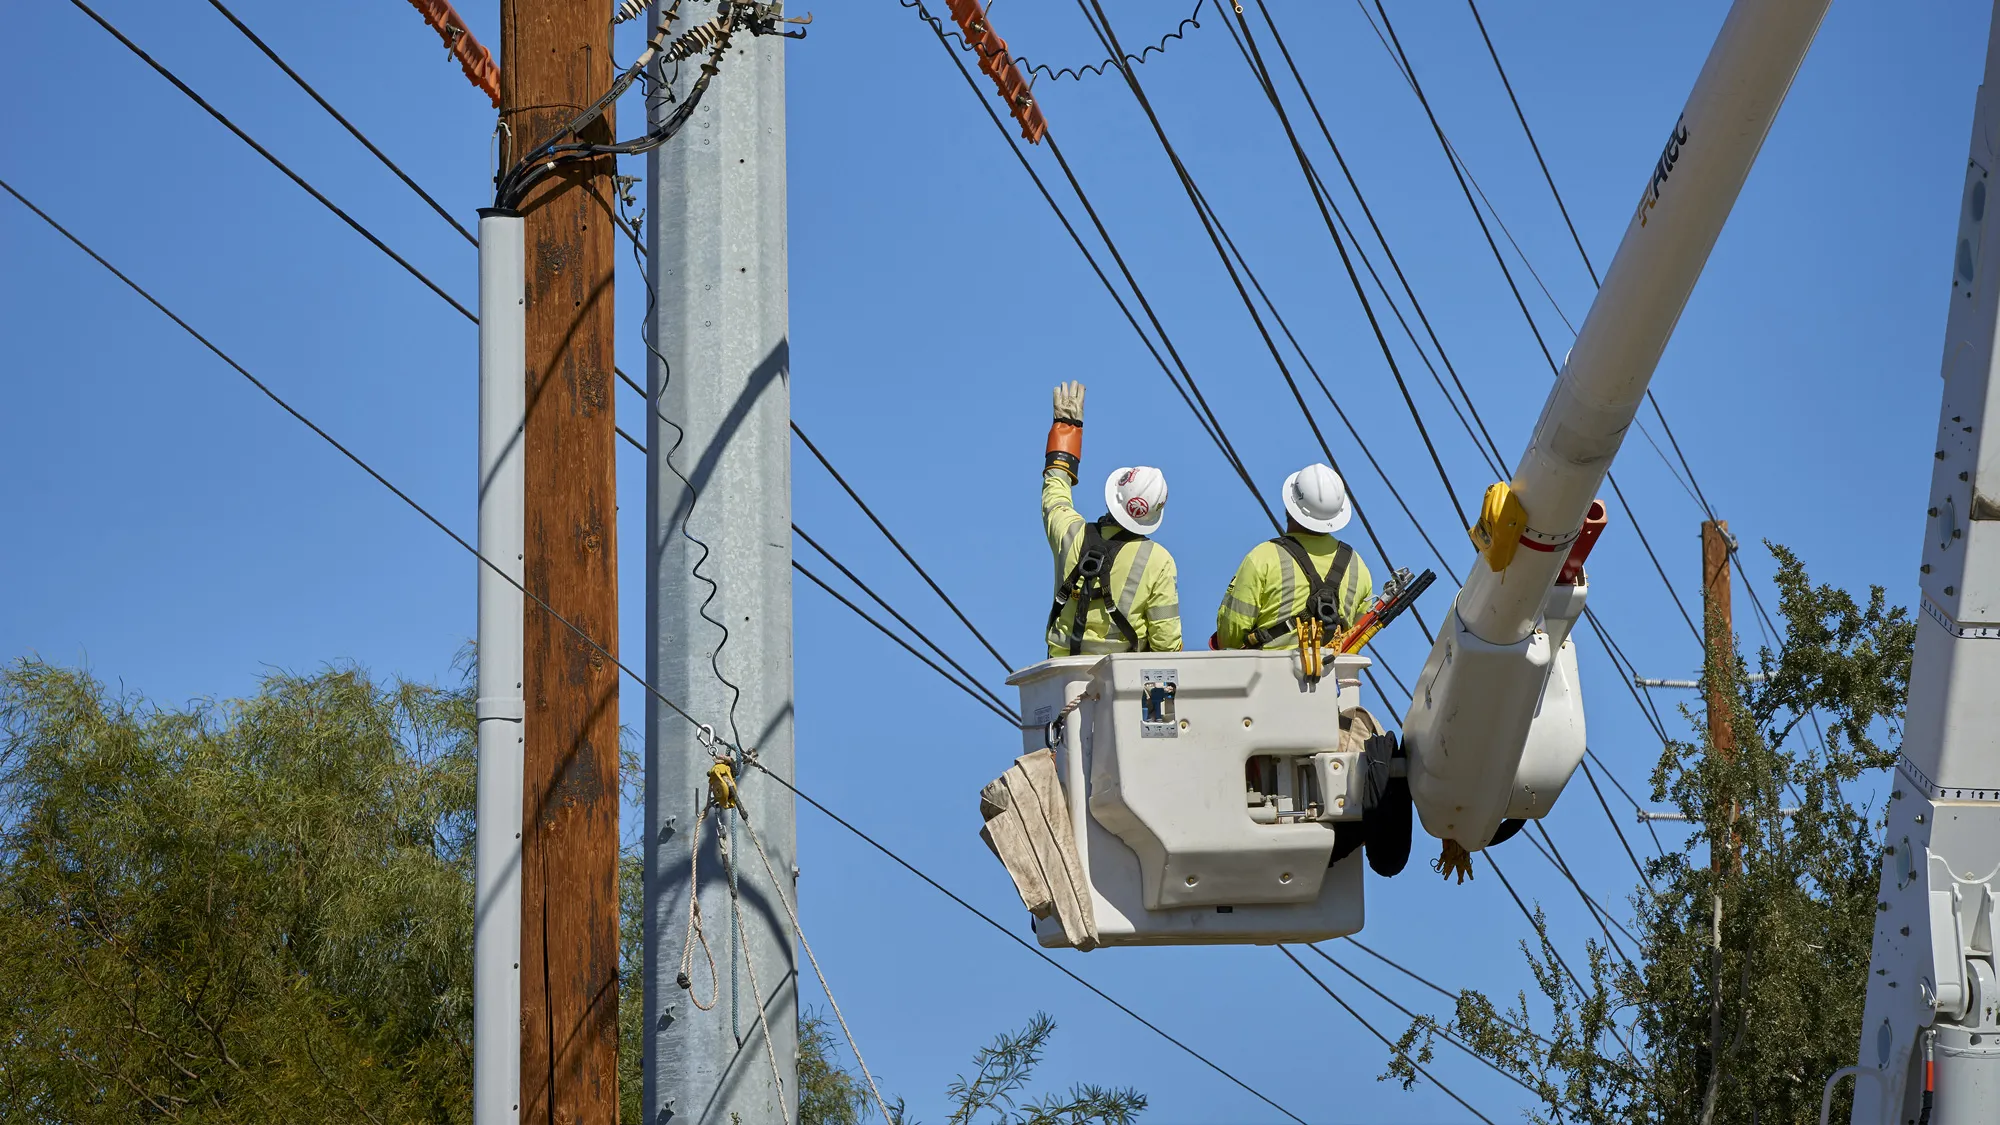 electrical crew in lift working on powerlines